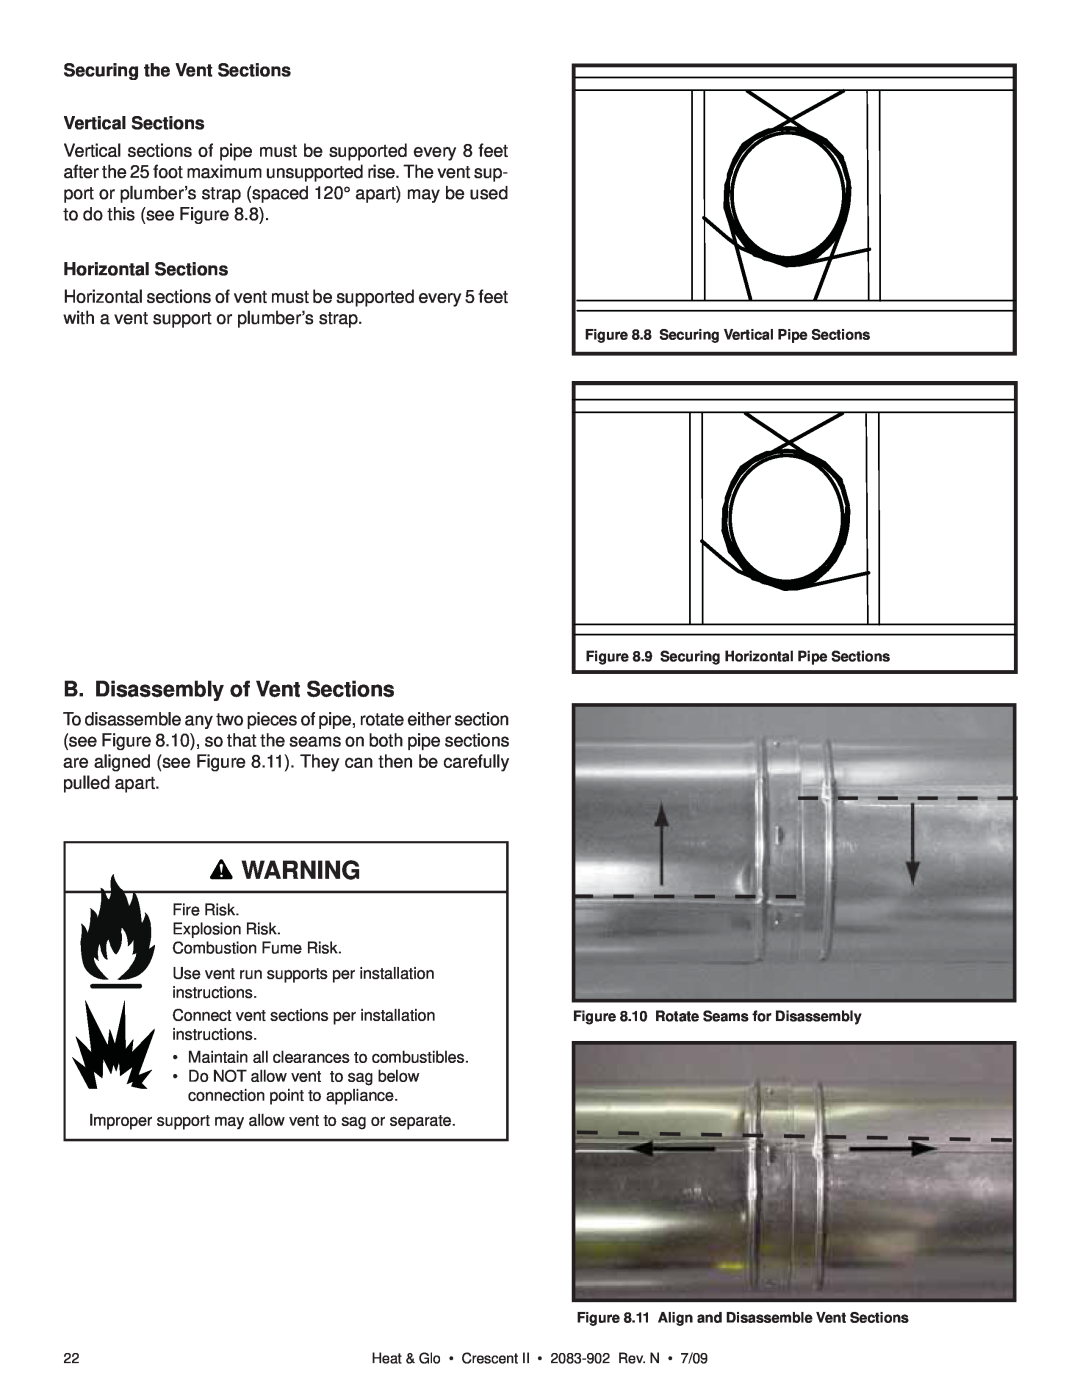 Heat & Glo LifeStyle CRESCENT II owner manual B. Disassembly of Vent Sections, Securing the Vent Sections Vertical Sections 